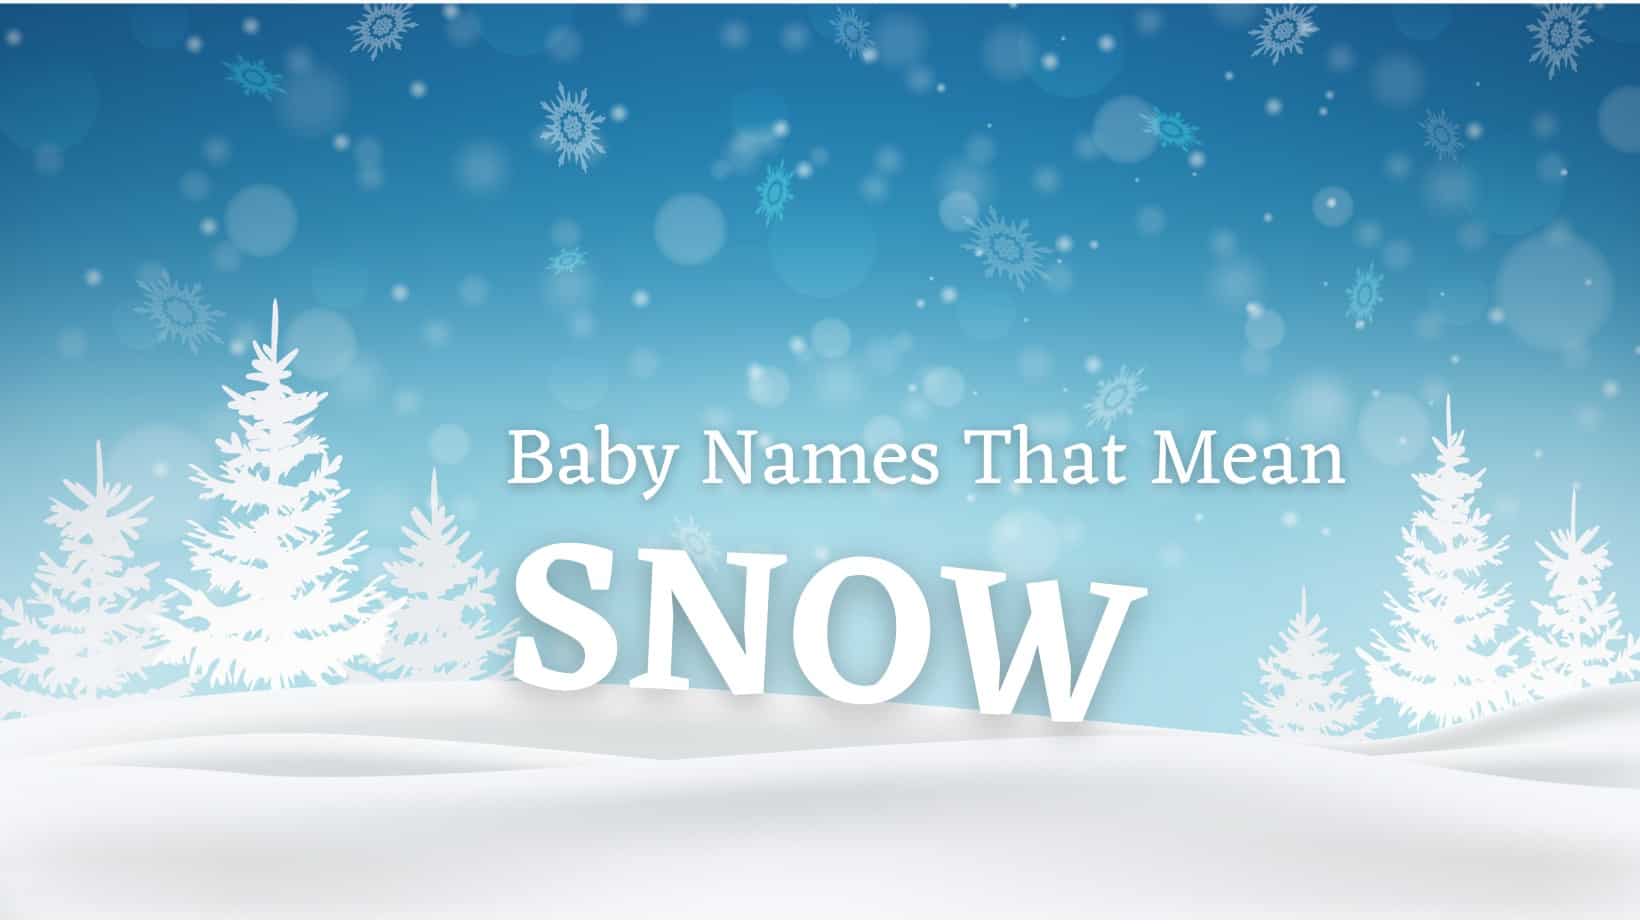 Baby Names That Mean Snow